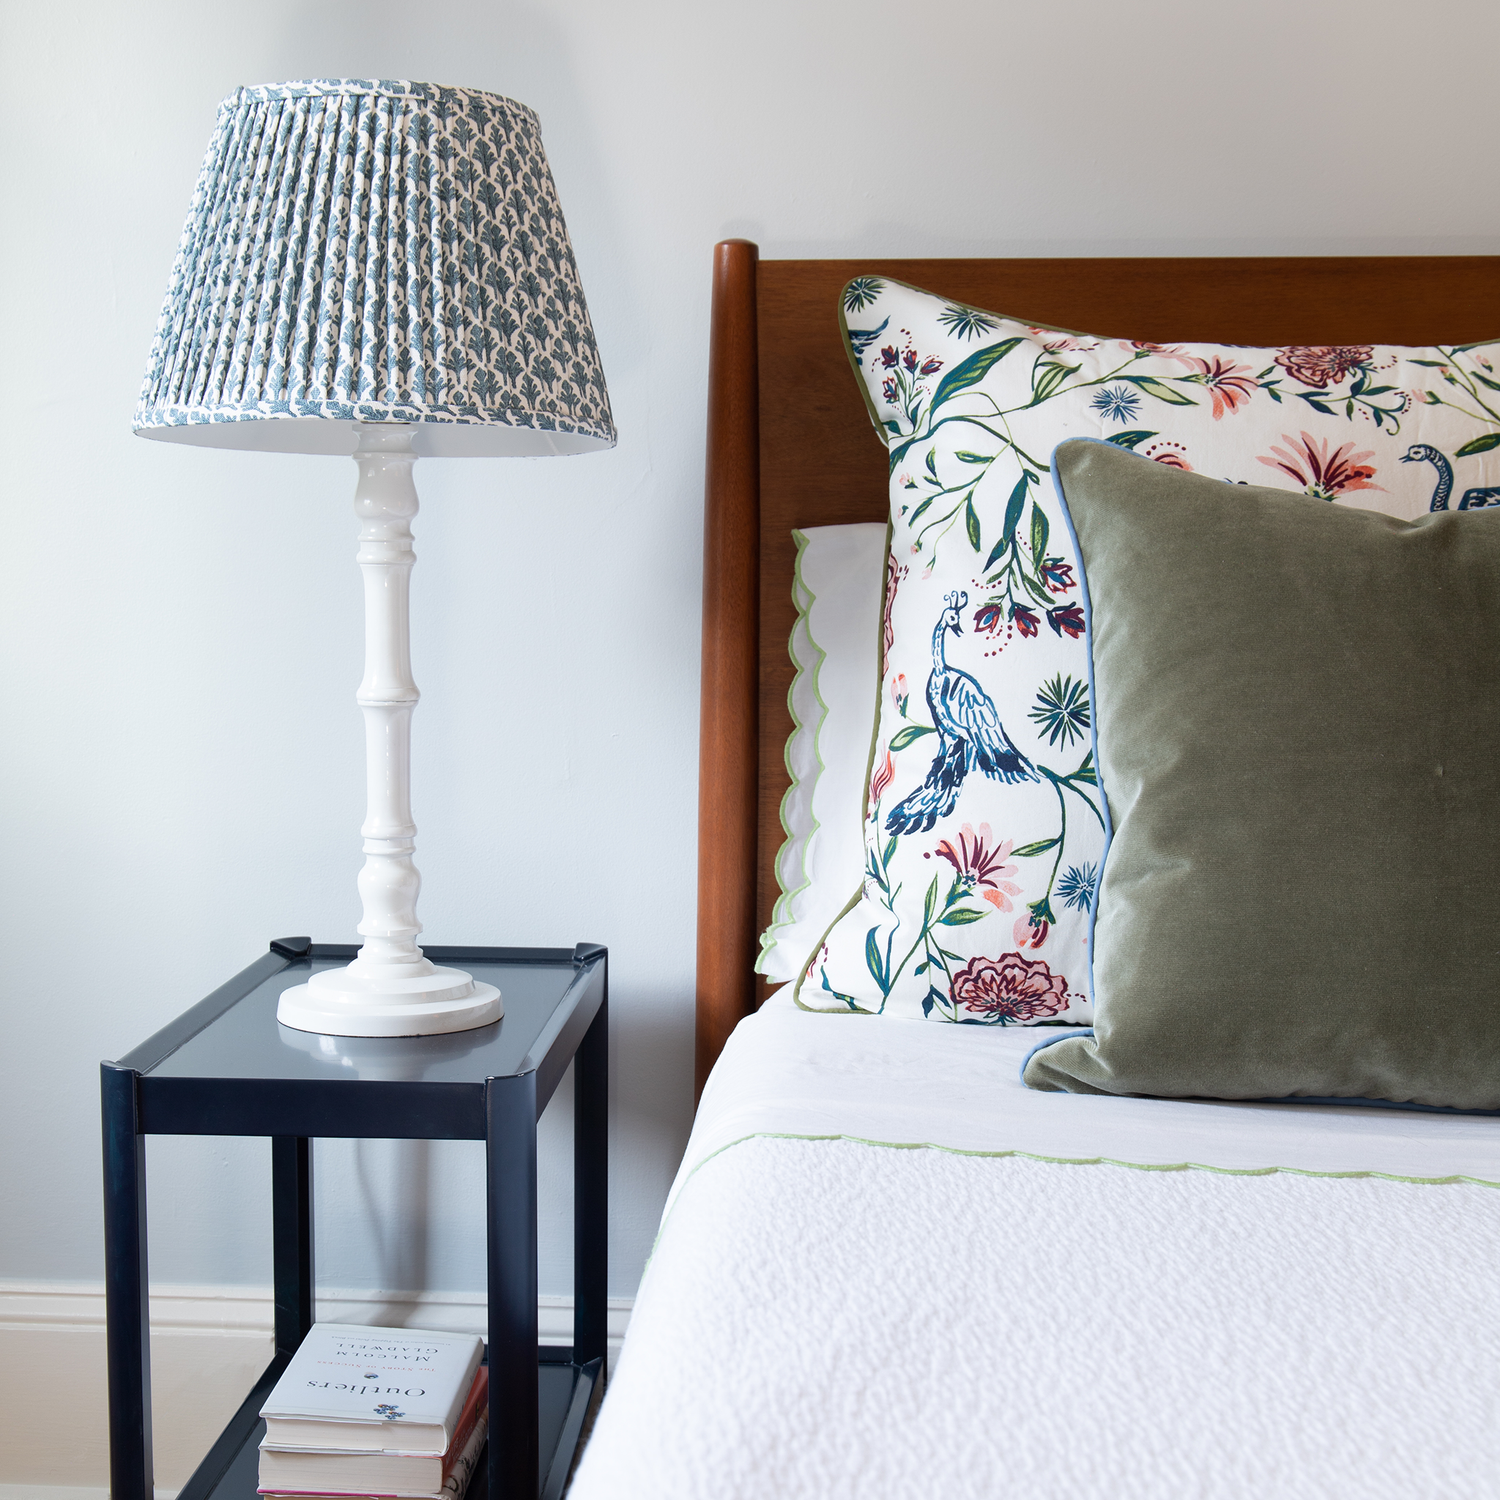 Bedroom styled with white bed with wooden headboard and Cream Chinoiserie and Fern Green Pillows next to navy night stand with white lamp and books stacked underneath